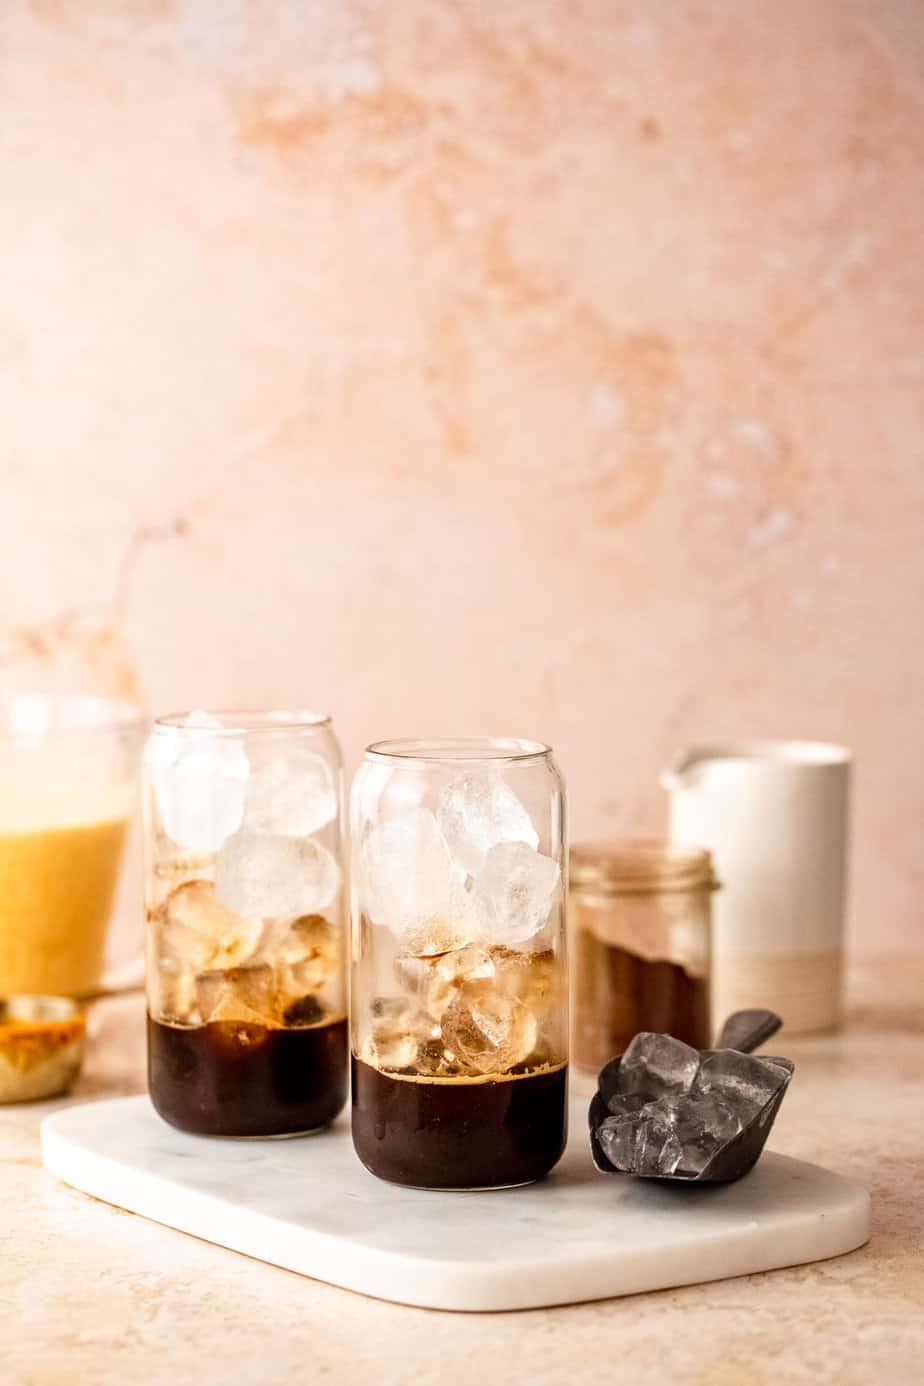 A glass filled with ice cubes and a shot of espresso.